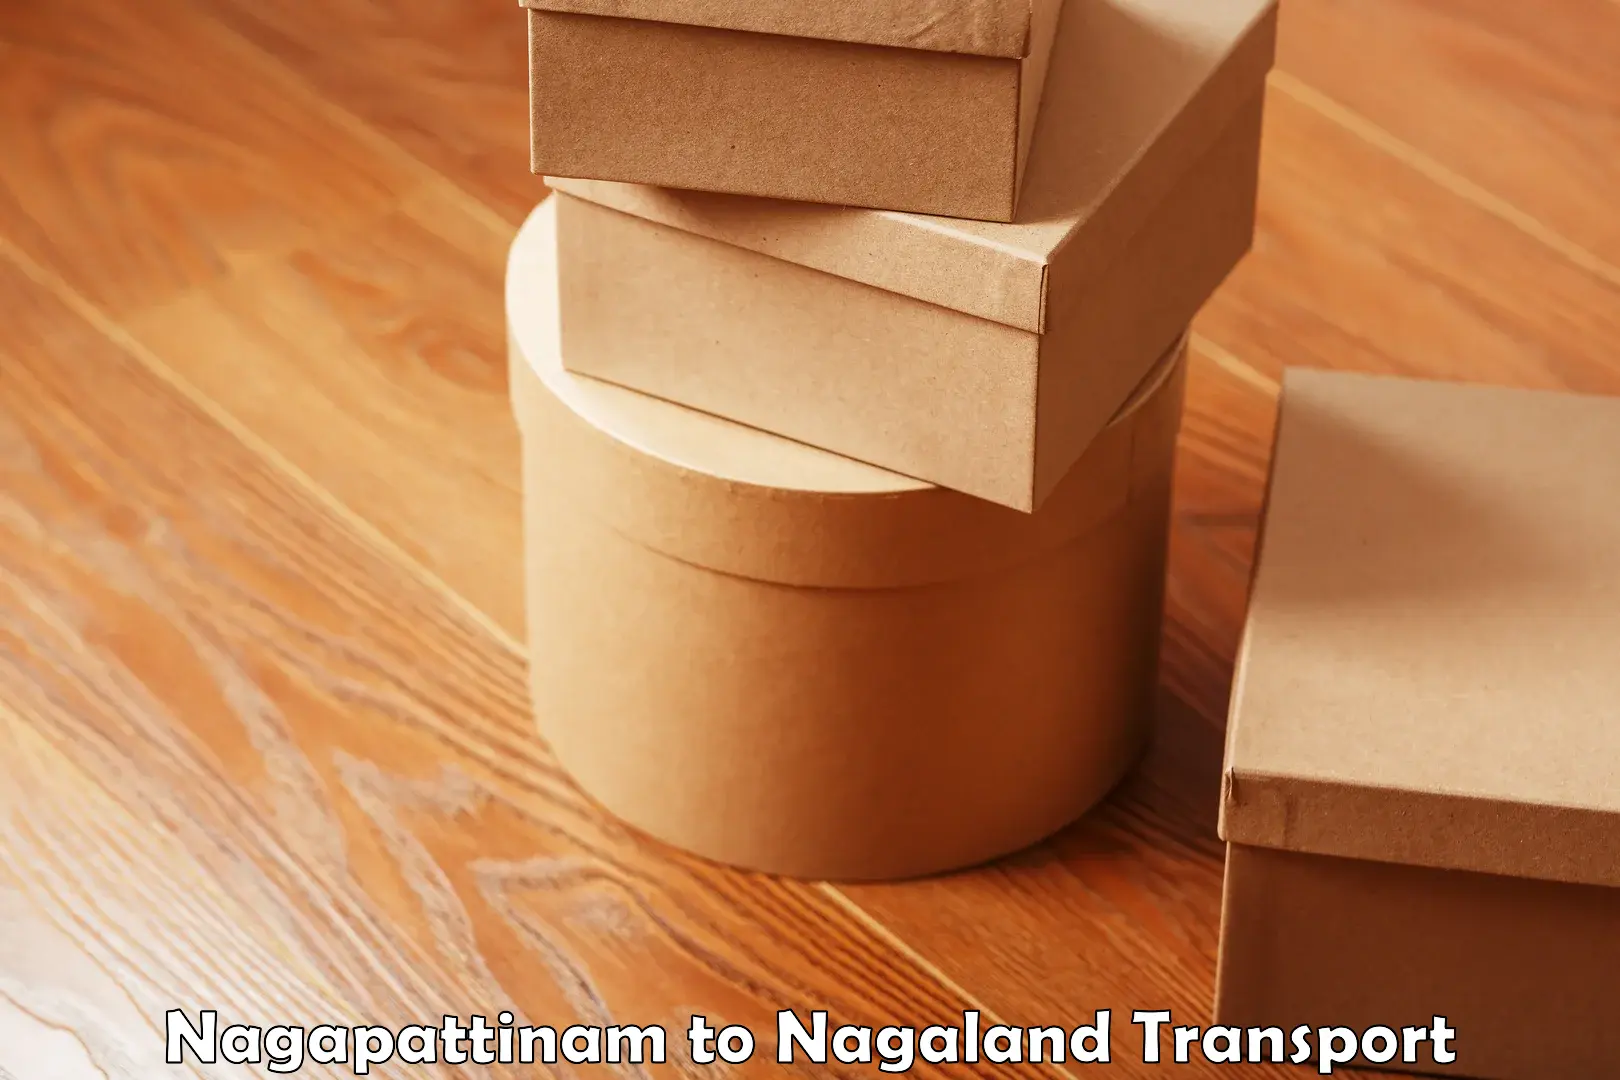 Delivery service in Nagapattinam to Kohima